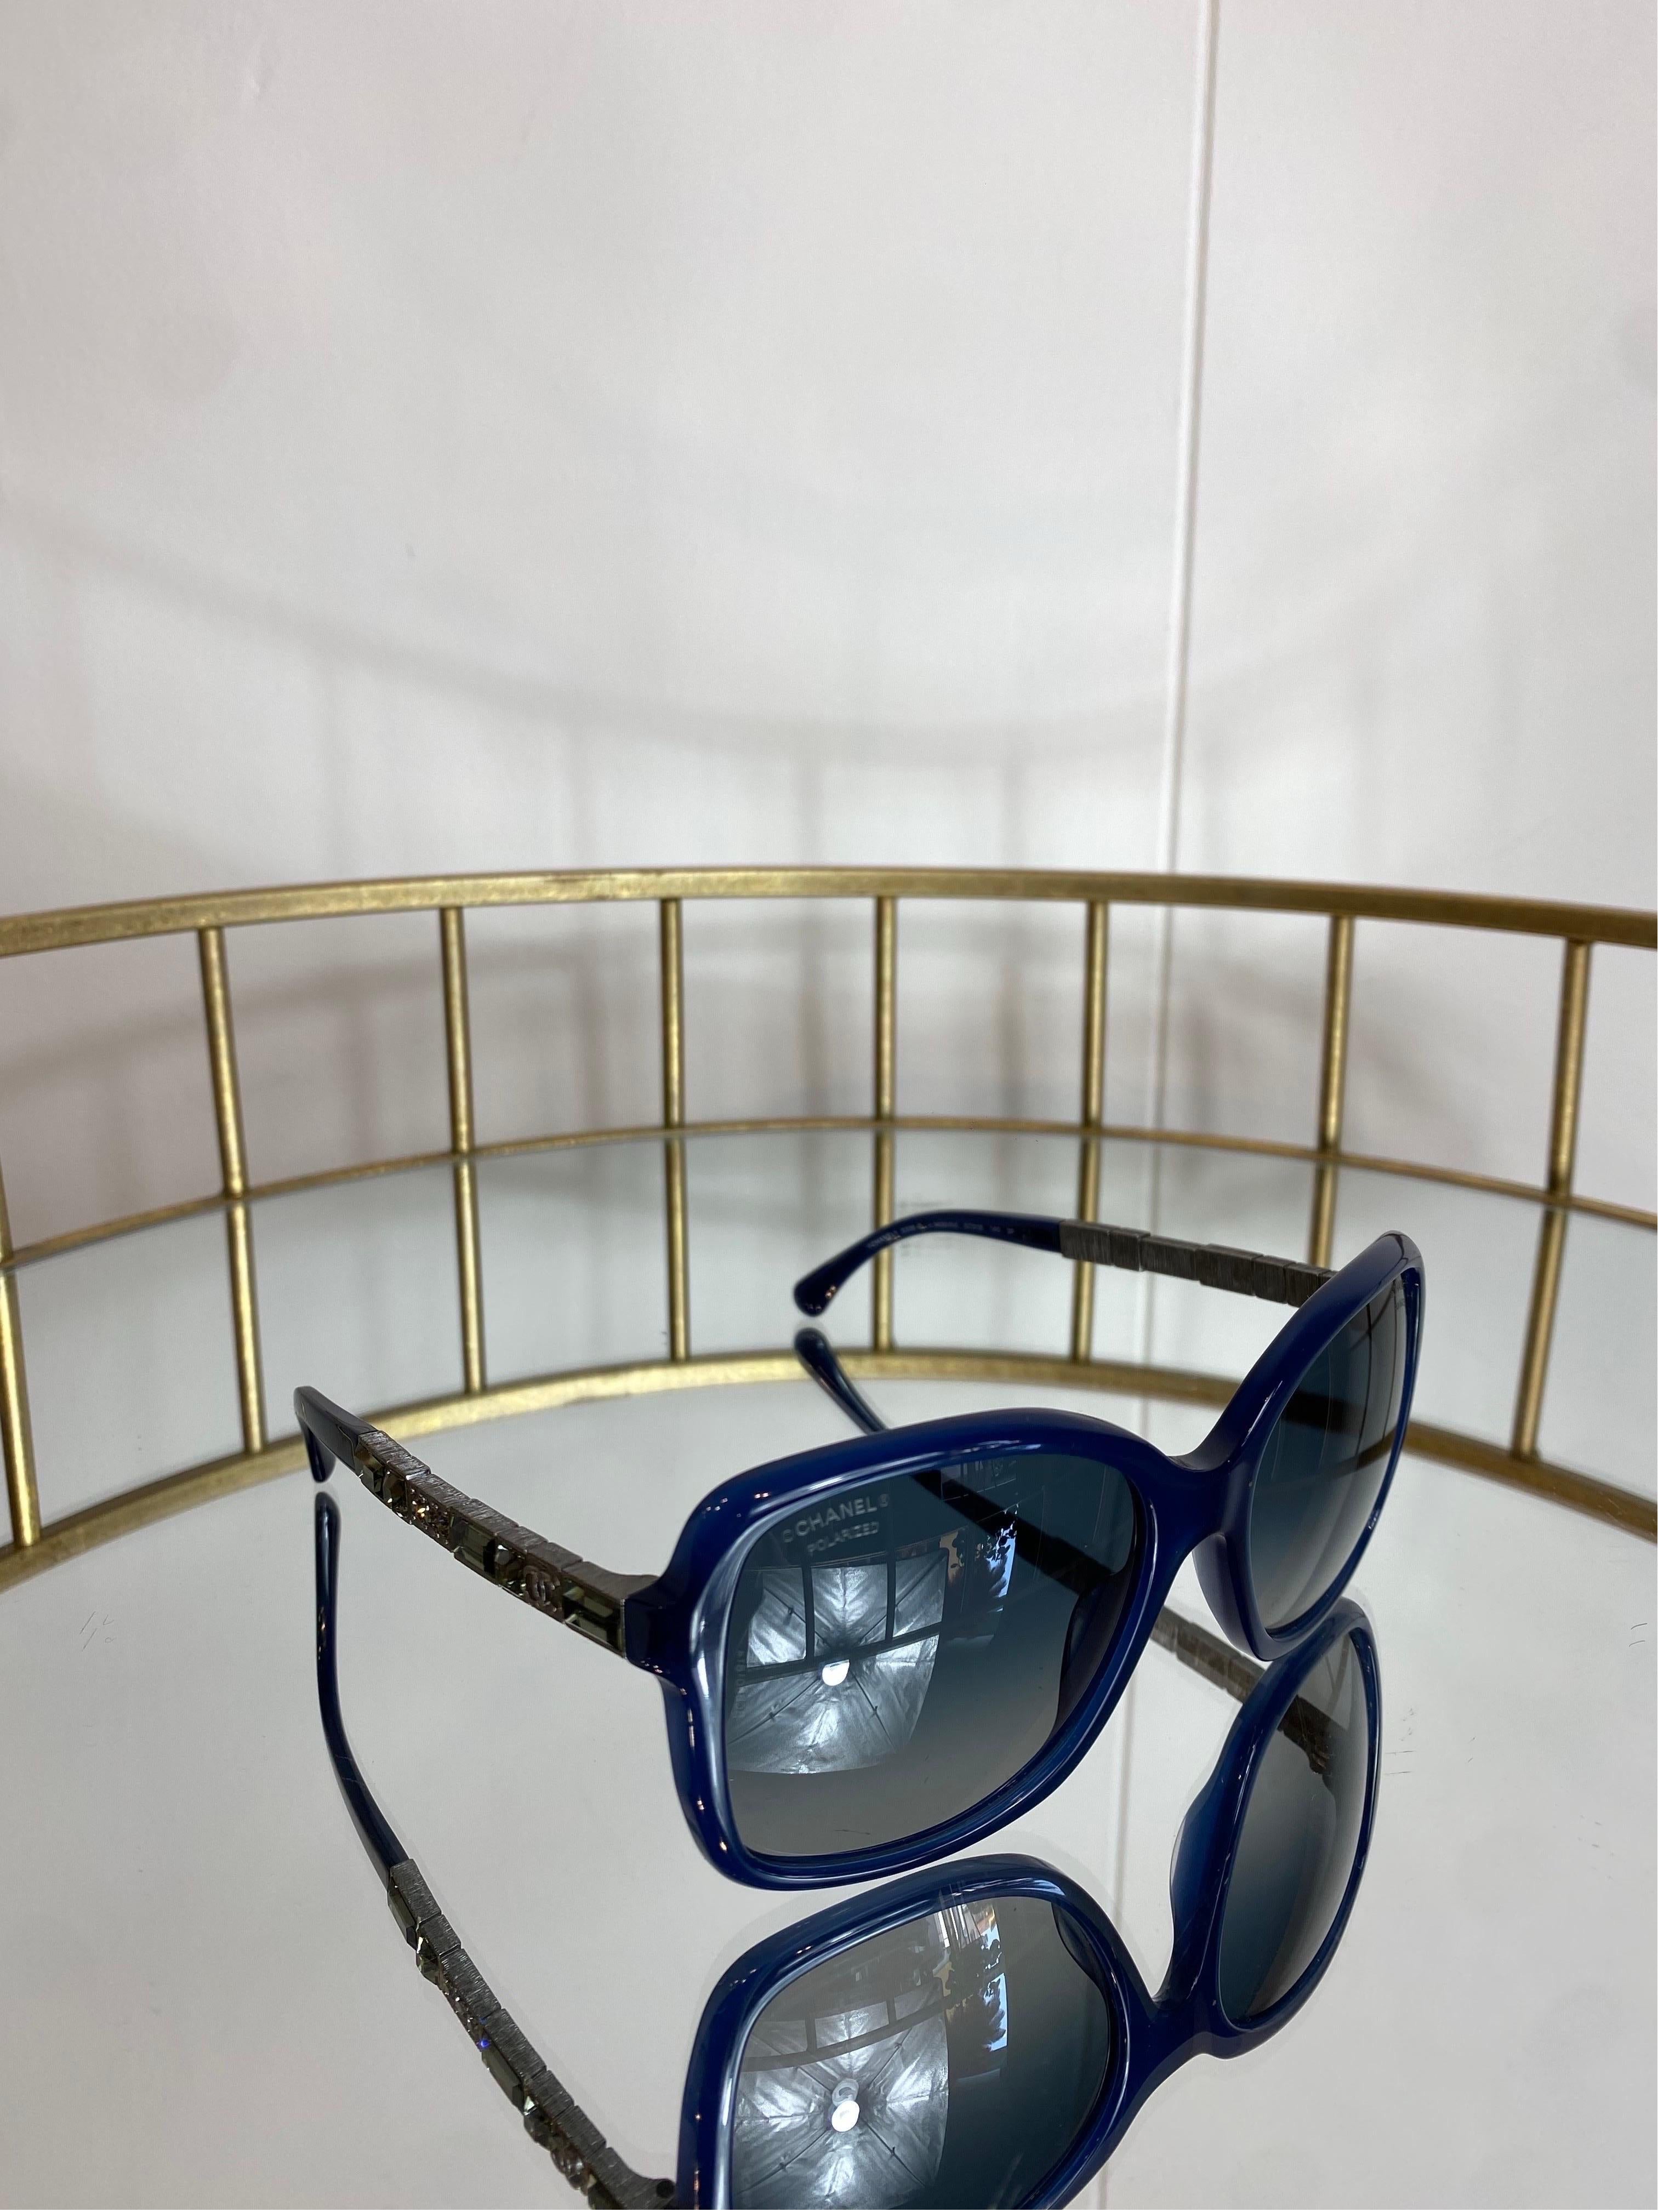 Chanel sunglasses.
Dark blue frame.
Detail of stones.
Polarized lens.
Length: 14.5cm
Width: 5.5cm
They have sunglasses box and original cloth.
Excellent condition, used very little.